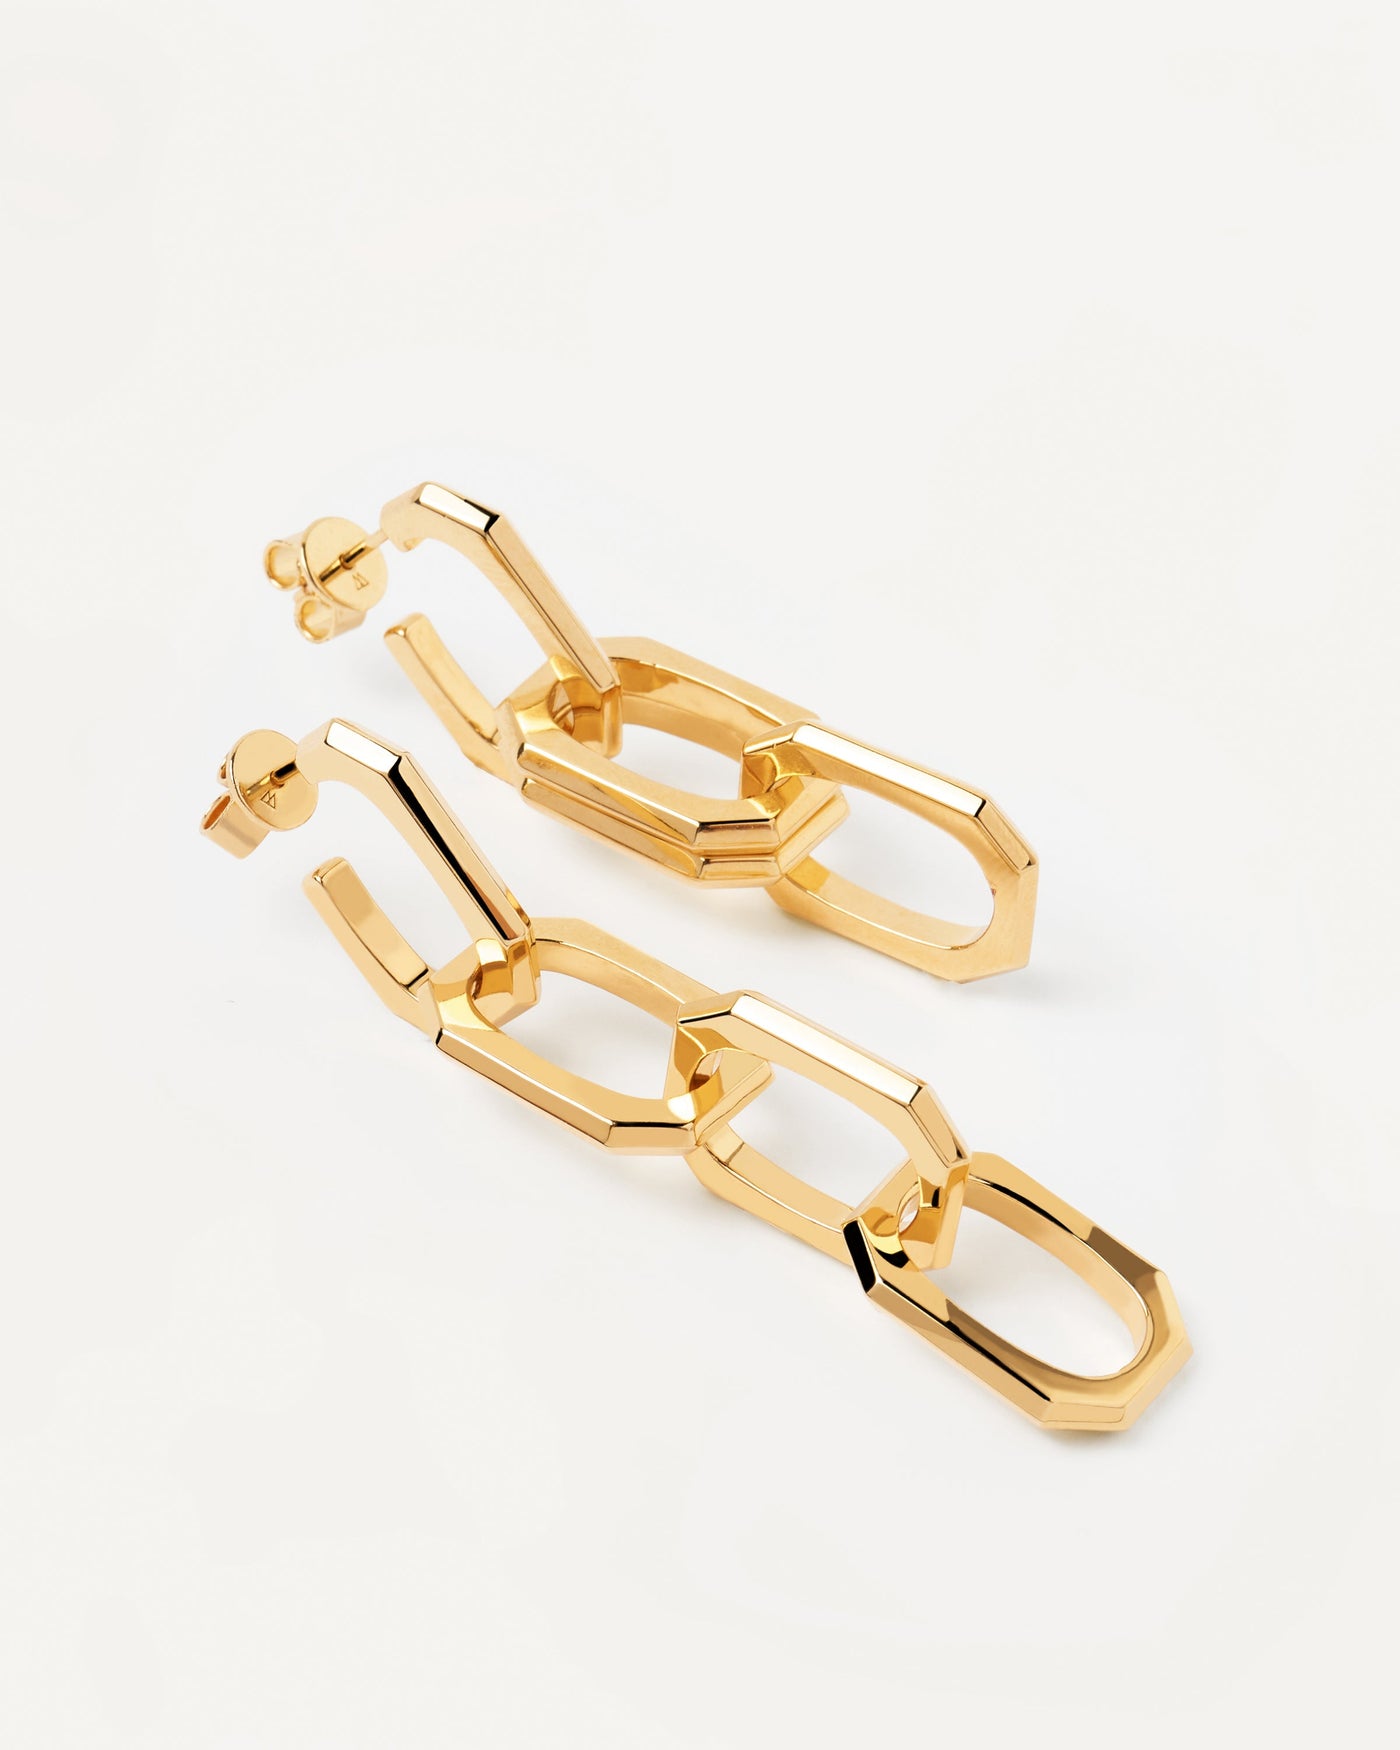 2023 Selection | Signature Chain Earrings. Cable chain hanging earrings with octogonal links in 18K gold plating. Get the latest arrival from PDPAOLA. Place your order safely and get this Best Seller. Free Shipping.